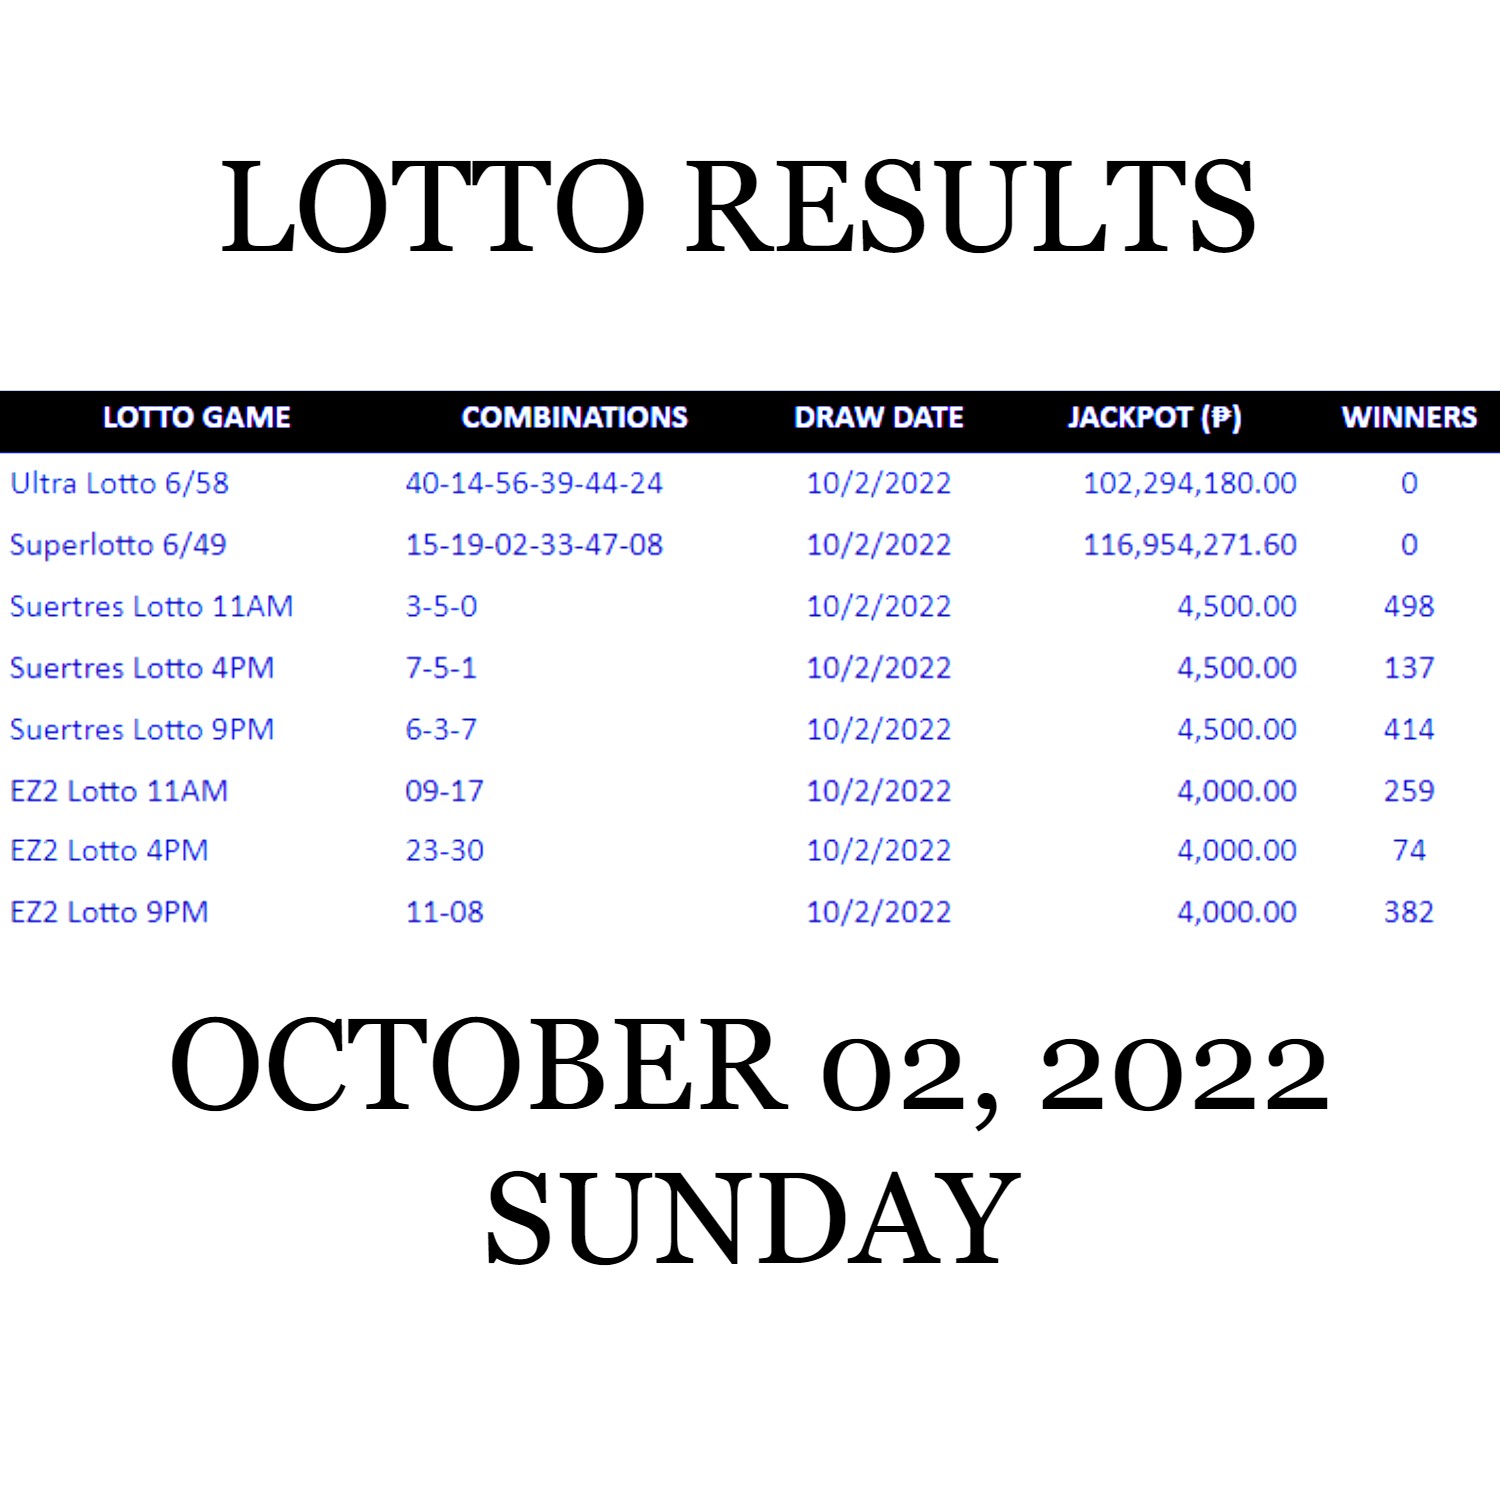 PCSO LOTTO RESULTS OCTOBER 02, 2022